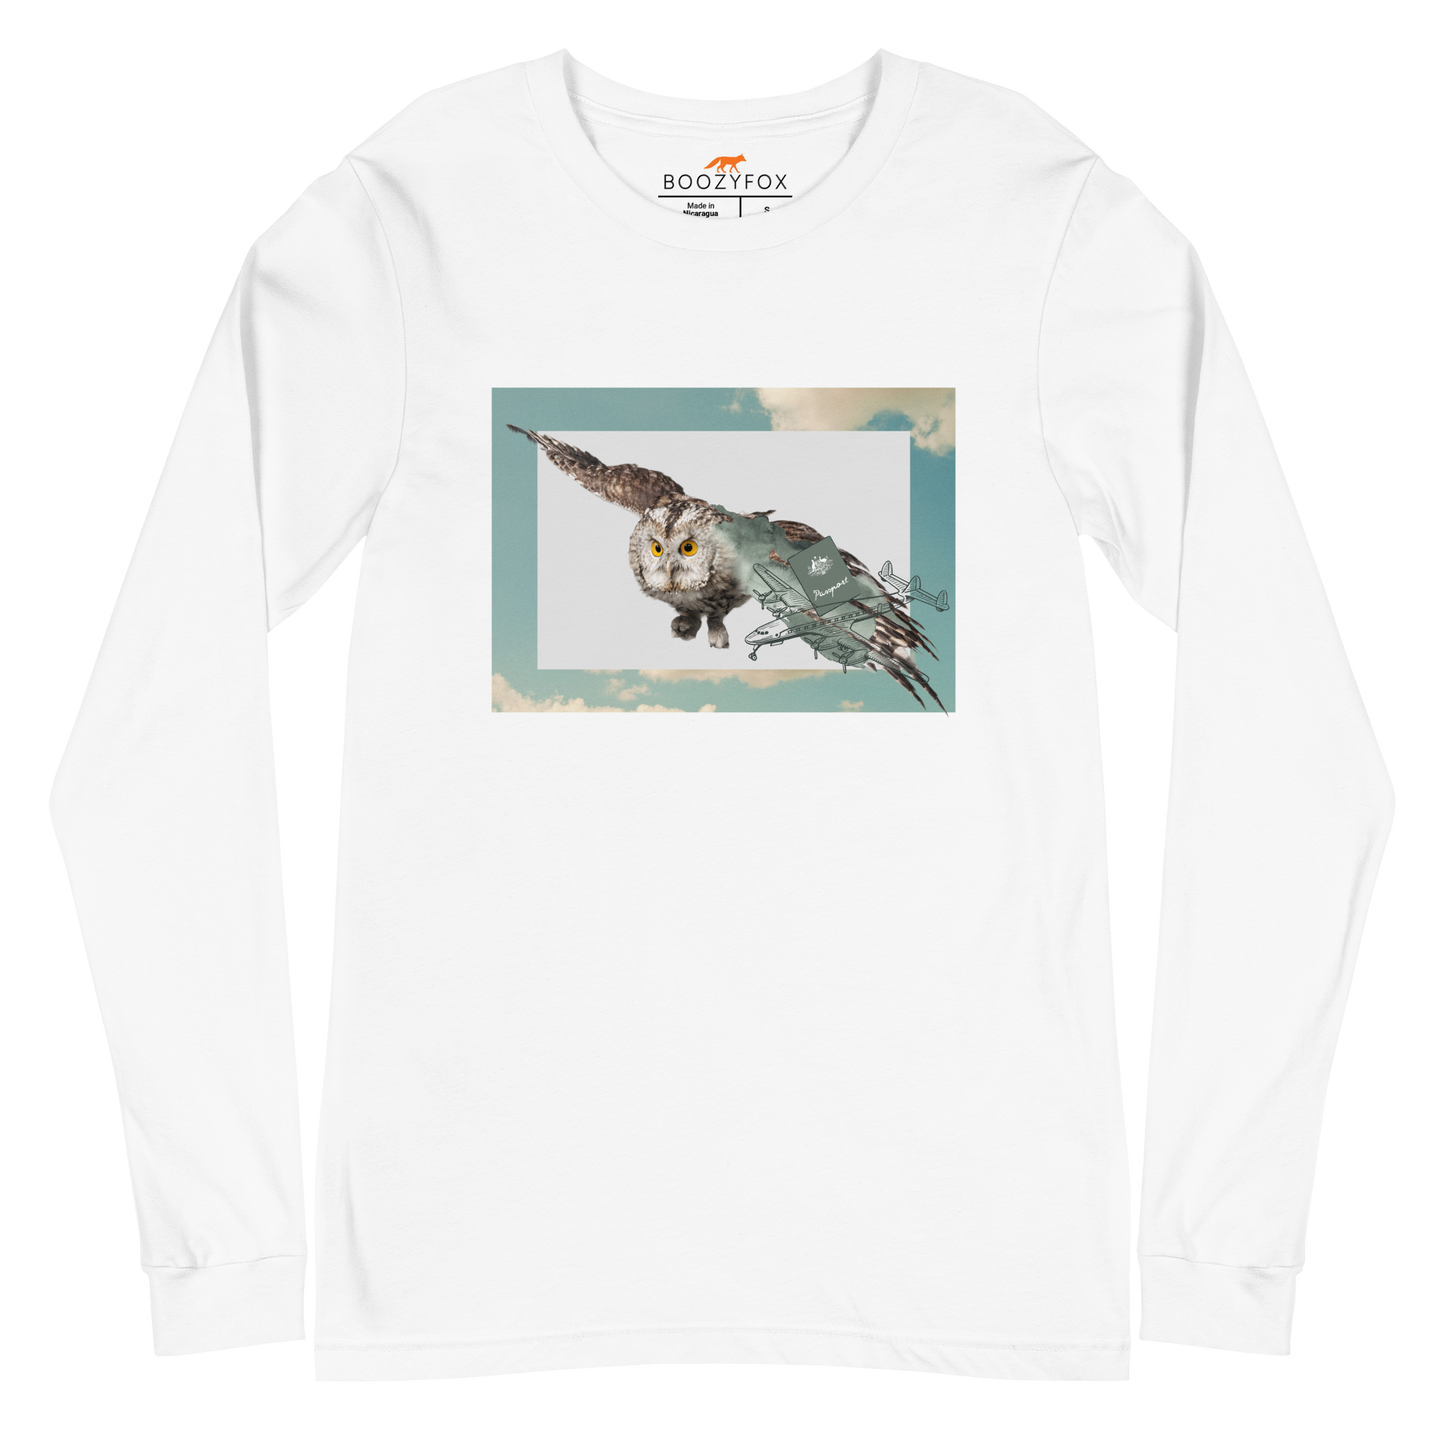 White Owl Long Sleeve Tee featuring a majestic Flying Owl graphic on the chest - Cool Owl Long Sleeve Graphic Tees - Boozy Fox